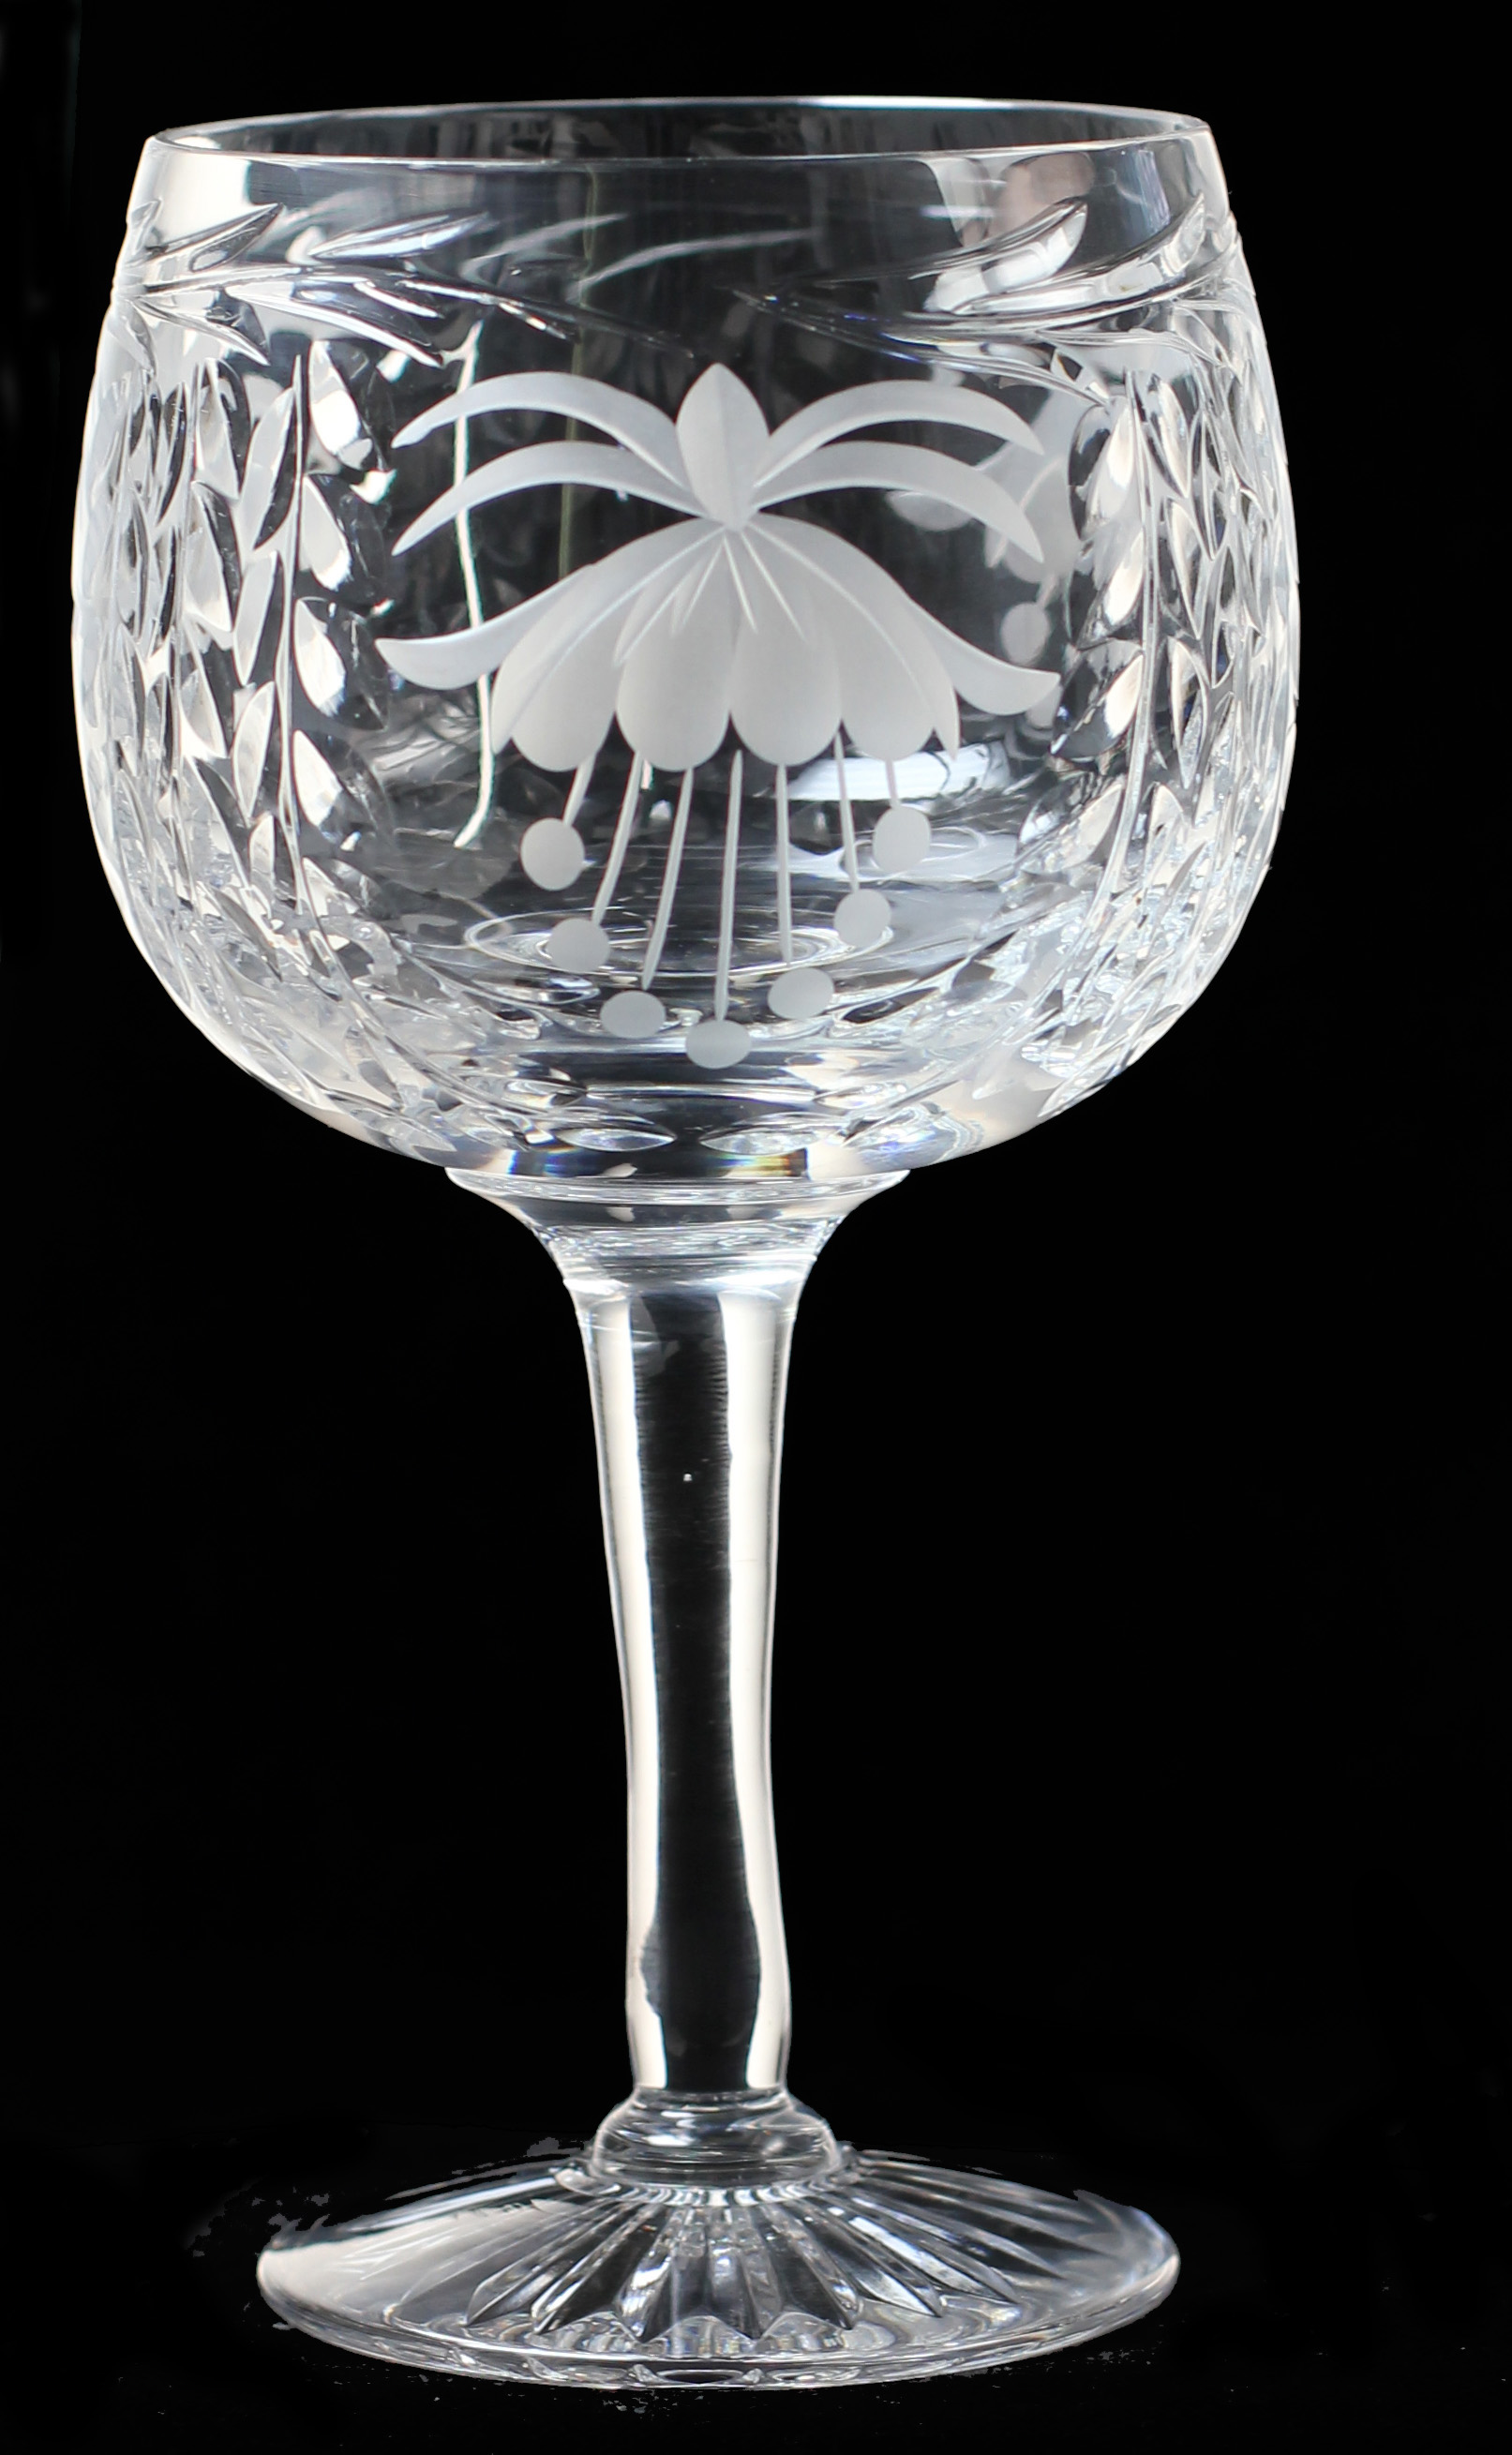 Gin Glasses Gin Goblets Crystal Glass Centre